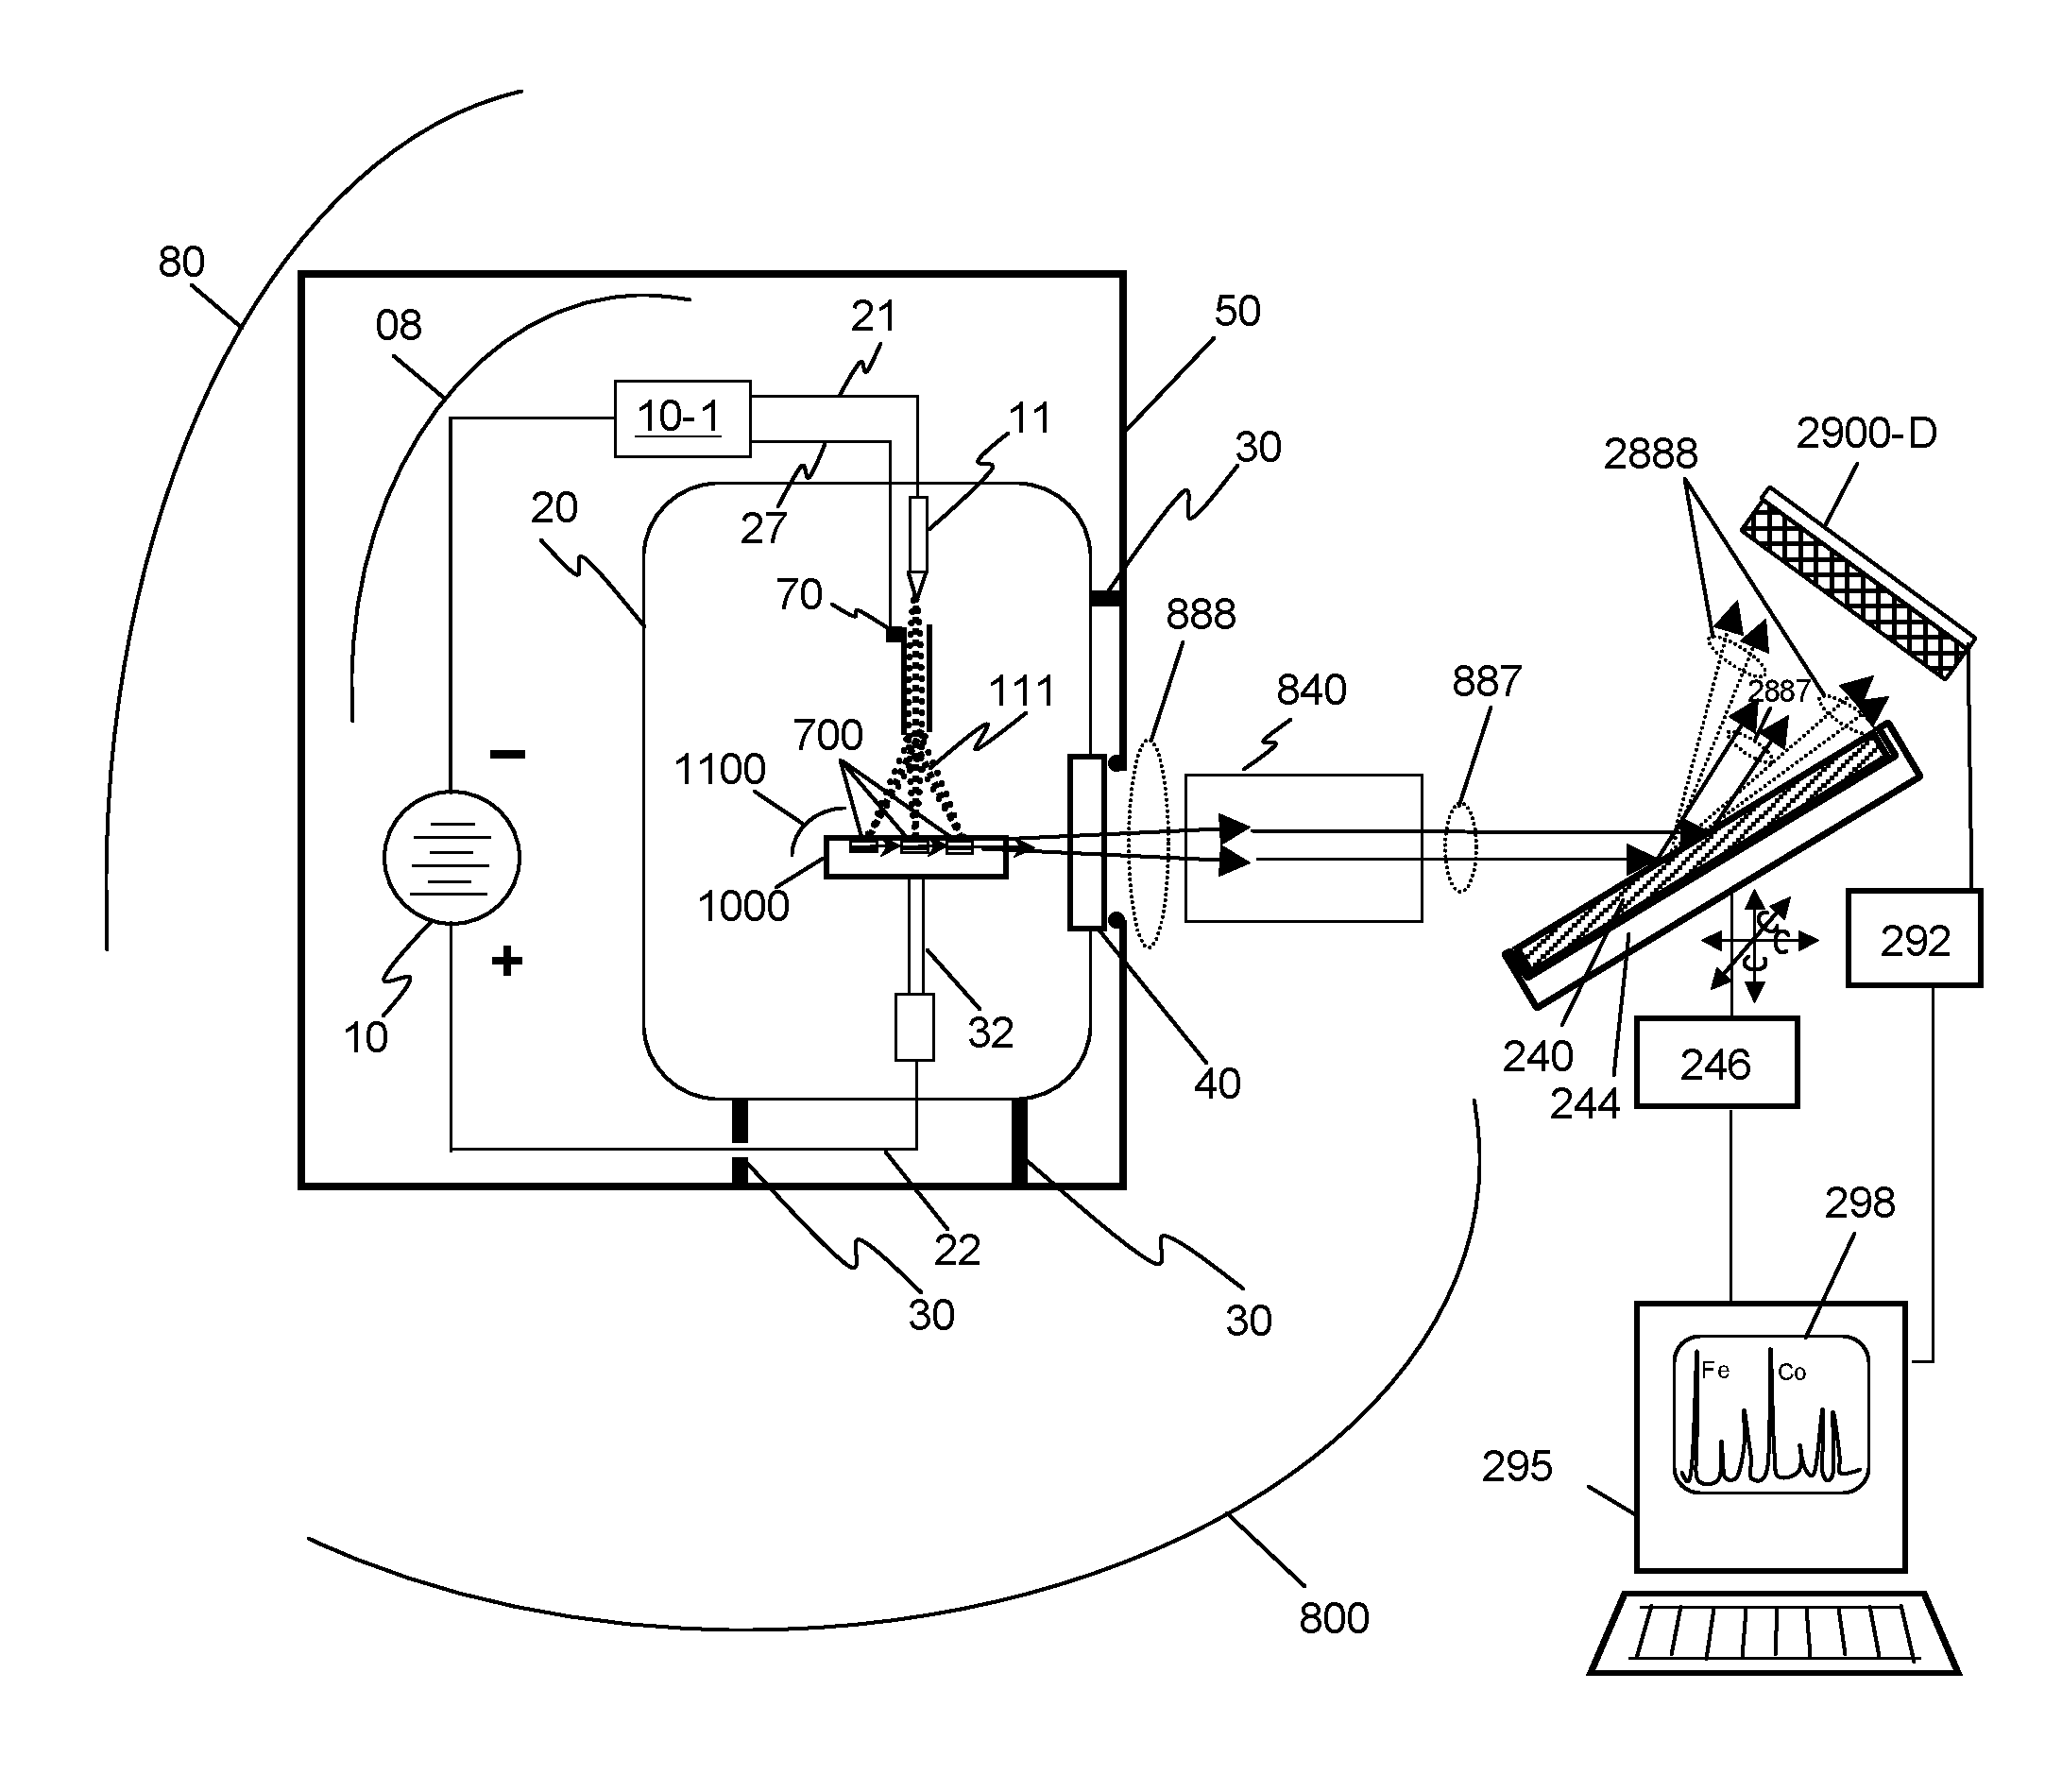 X-ray surface analysis and measurement apparatus